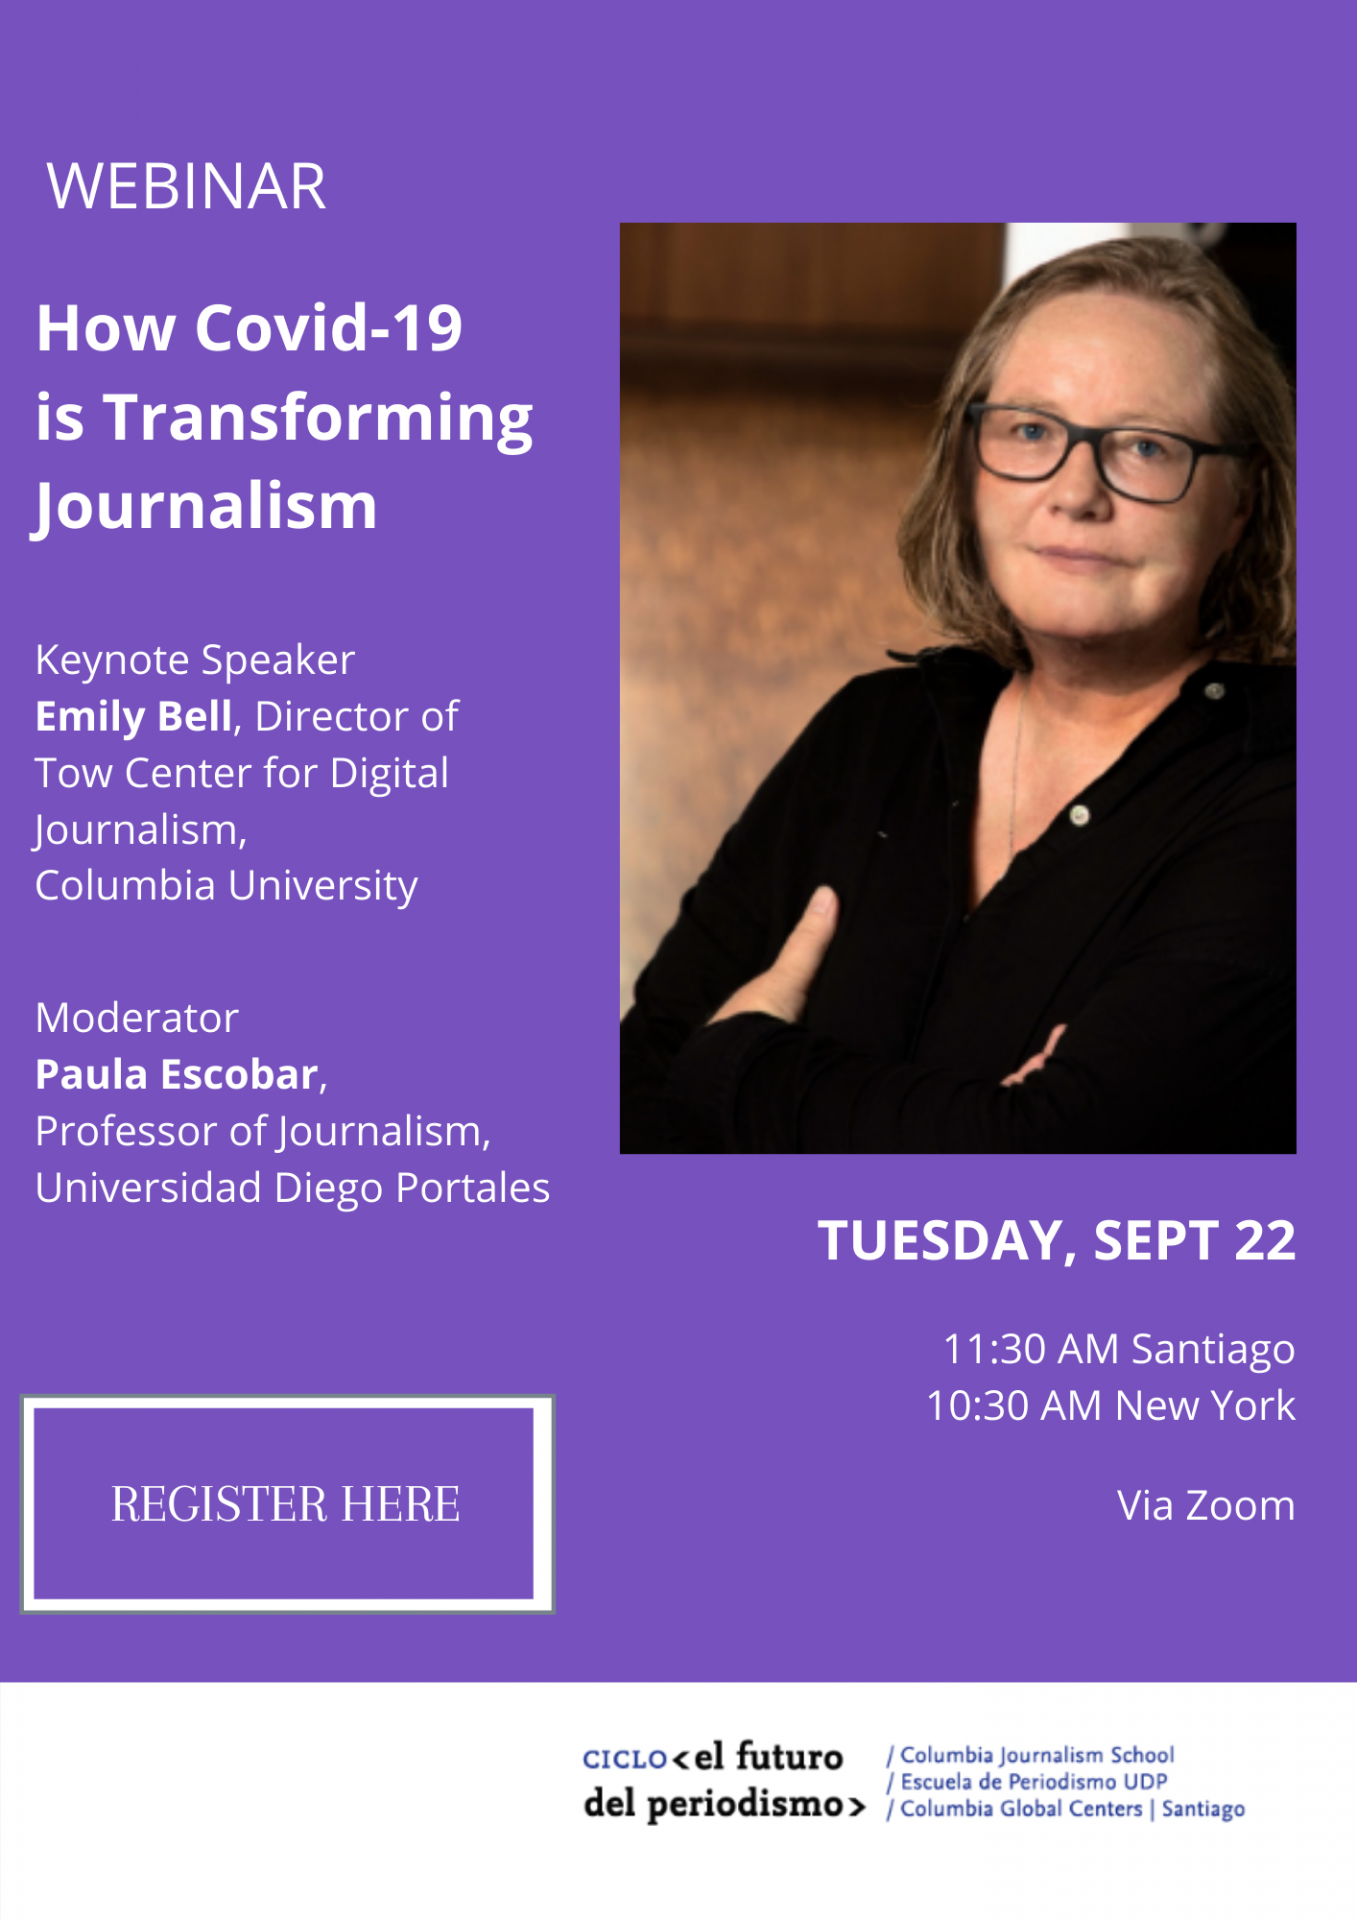 How Covid-19 is Transforming Journalism